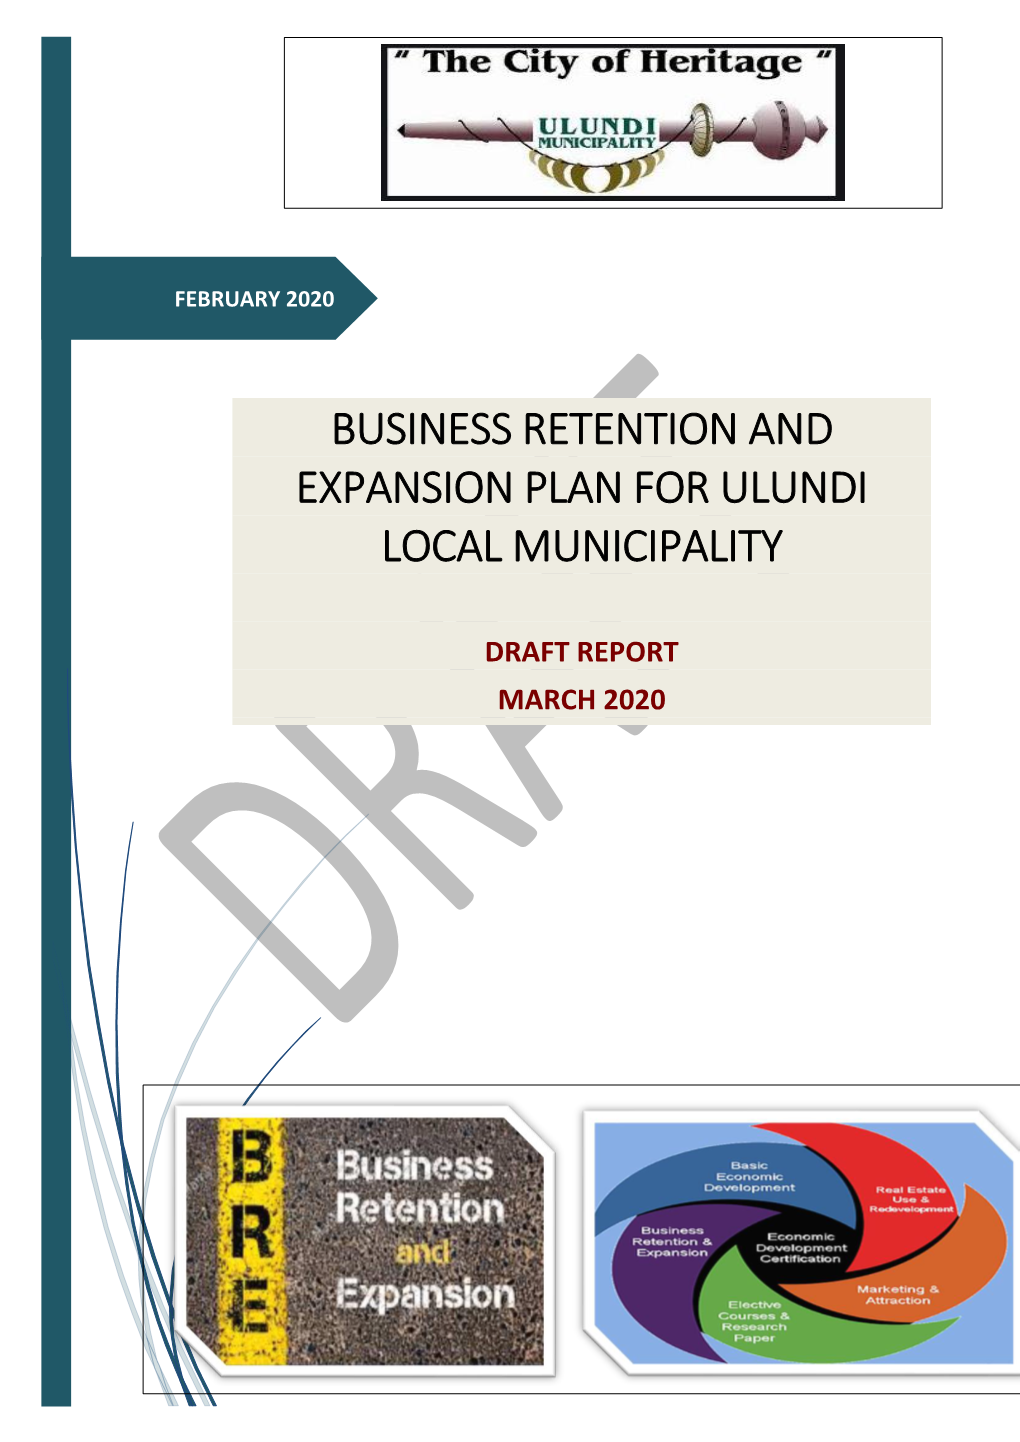 Business Retention and Expansion Plan for Ulundi Local Municipality